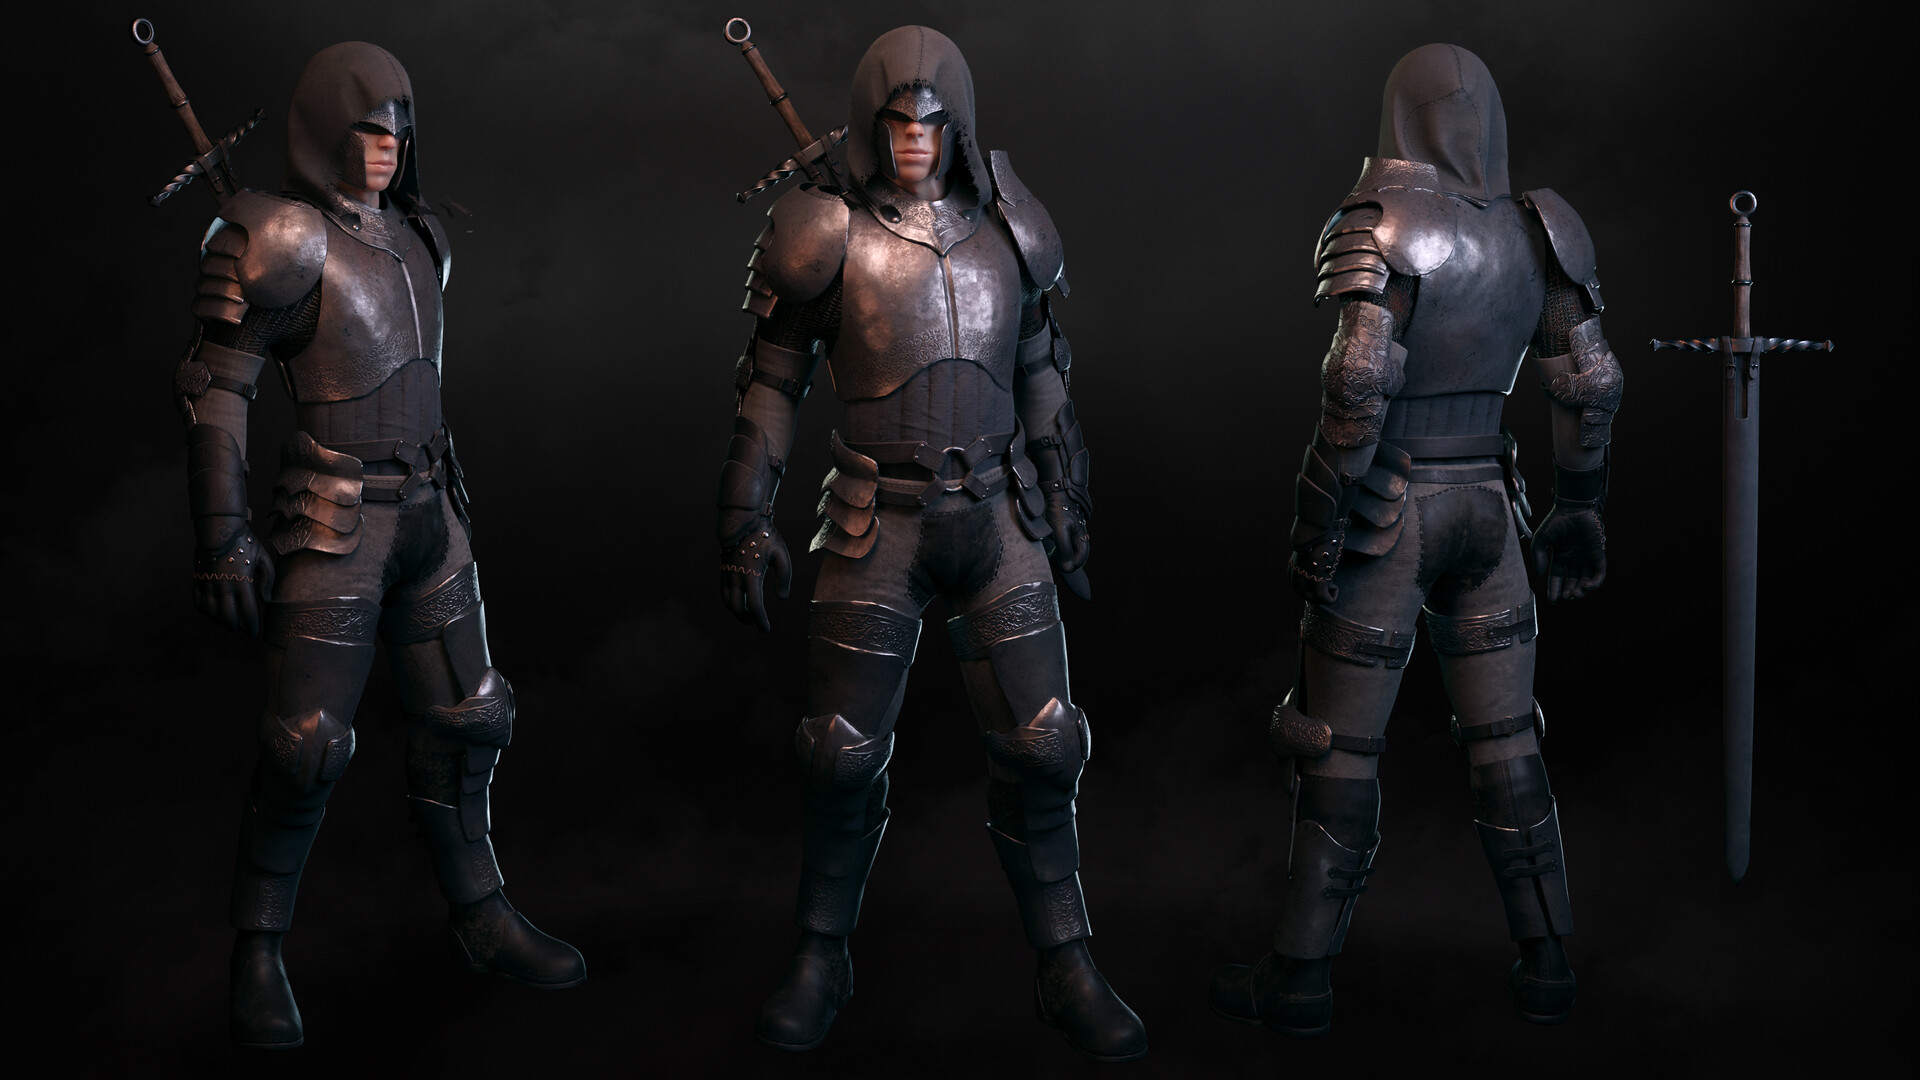 ArtStation - The Acolyte - Game-ready 3D Character